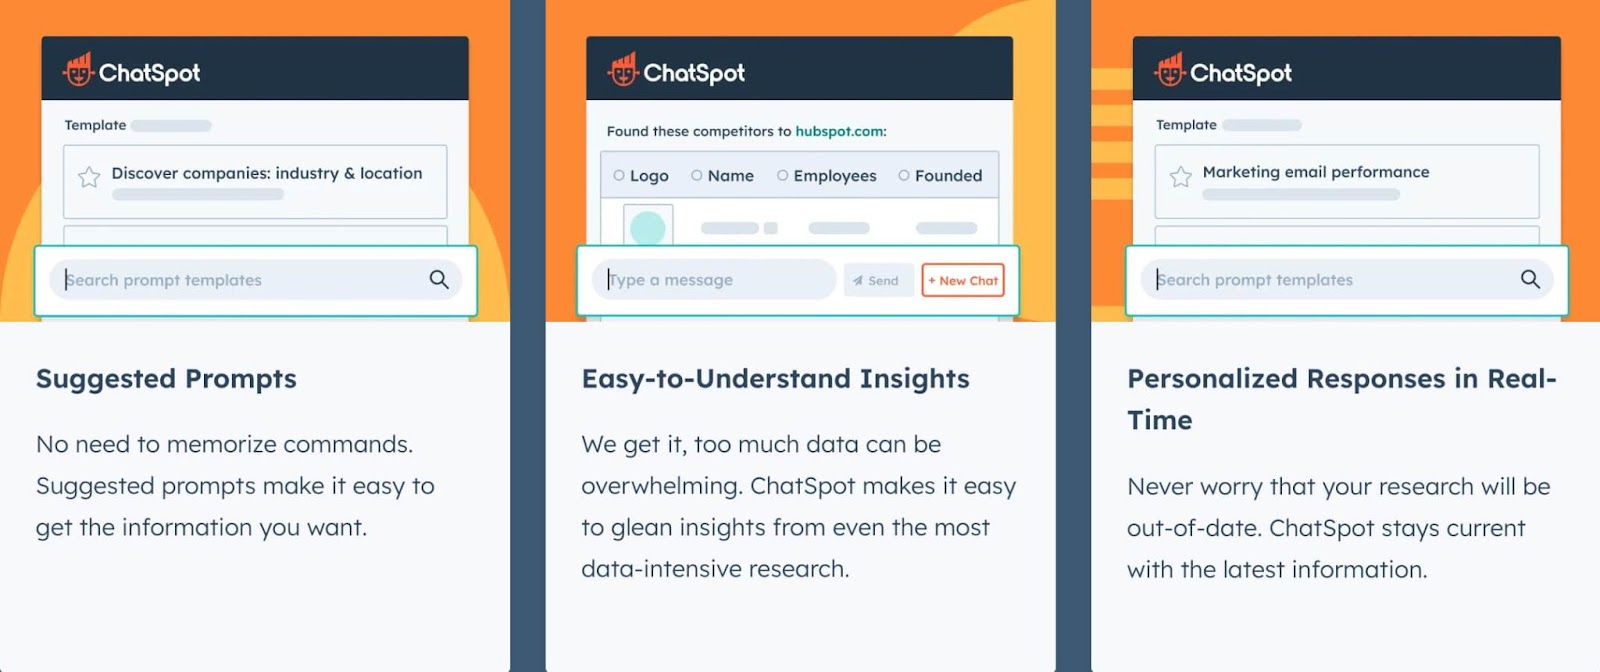 ChatSpot abilities. Suggested Prompts, easy-to-understand insights, and personalized responses in real-time.